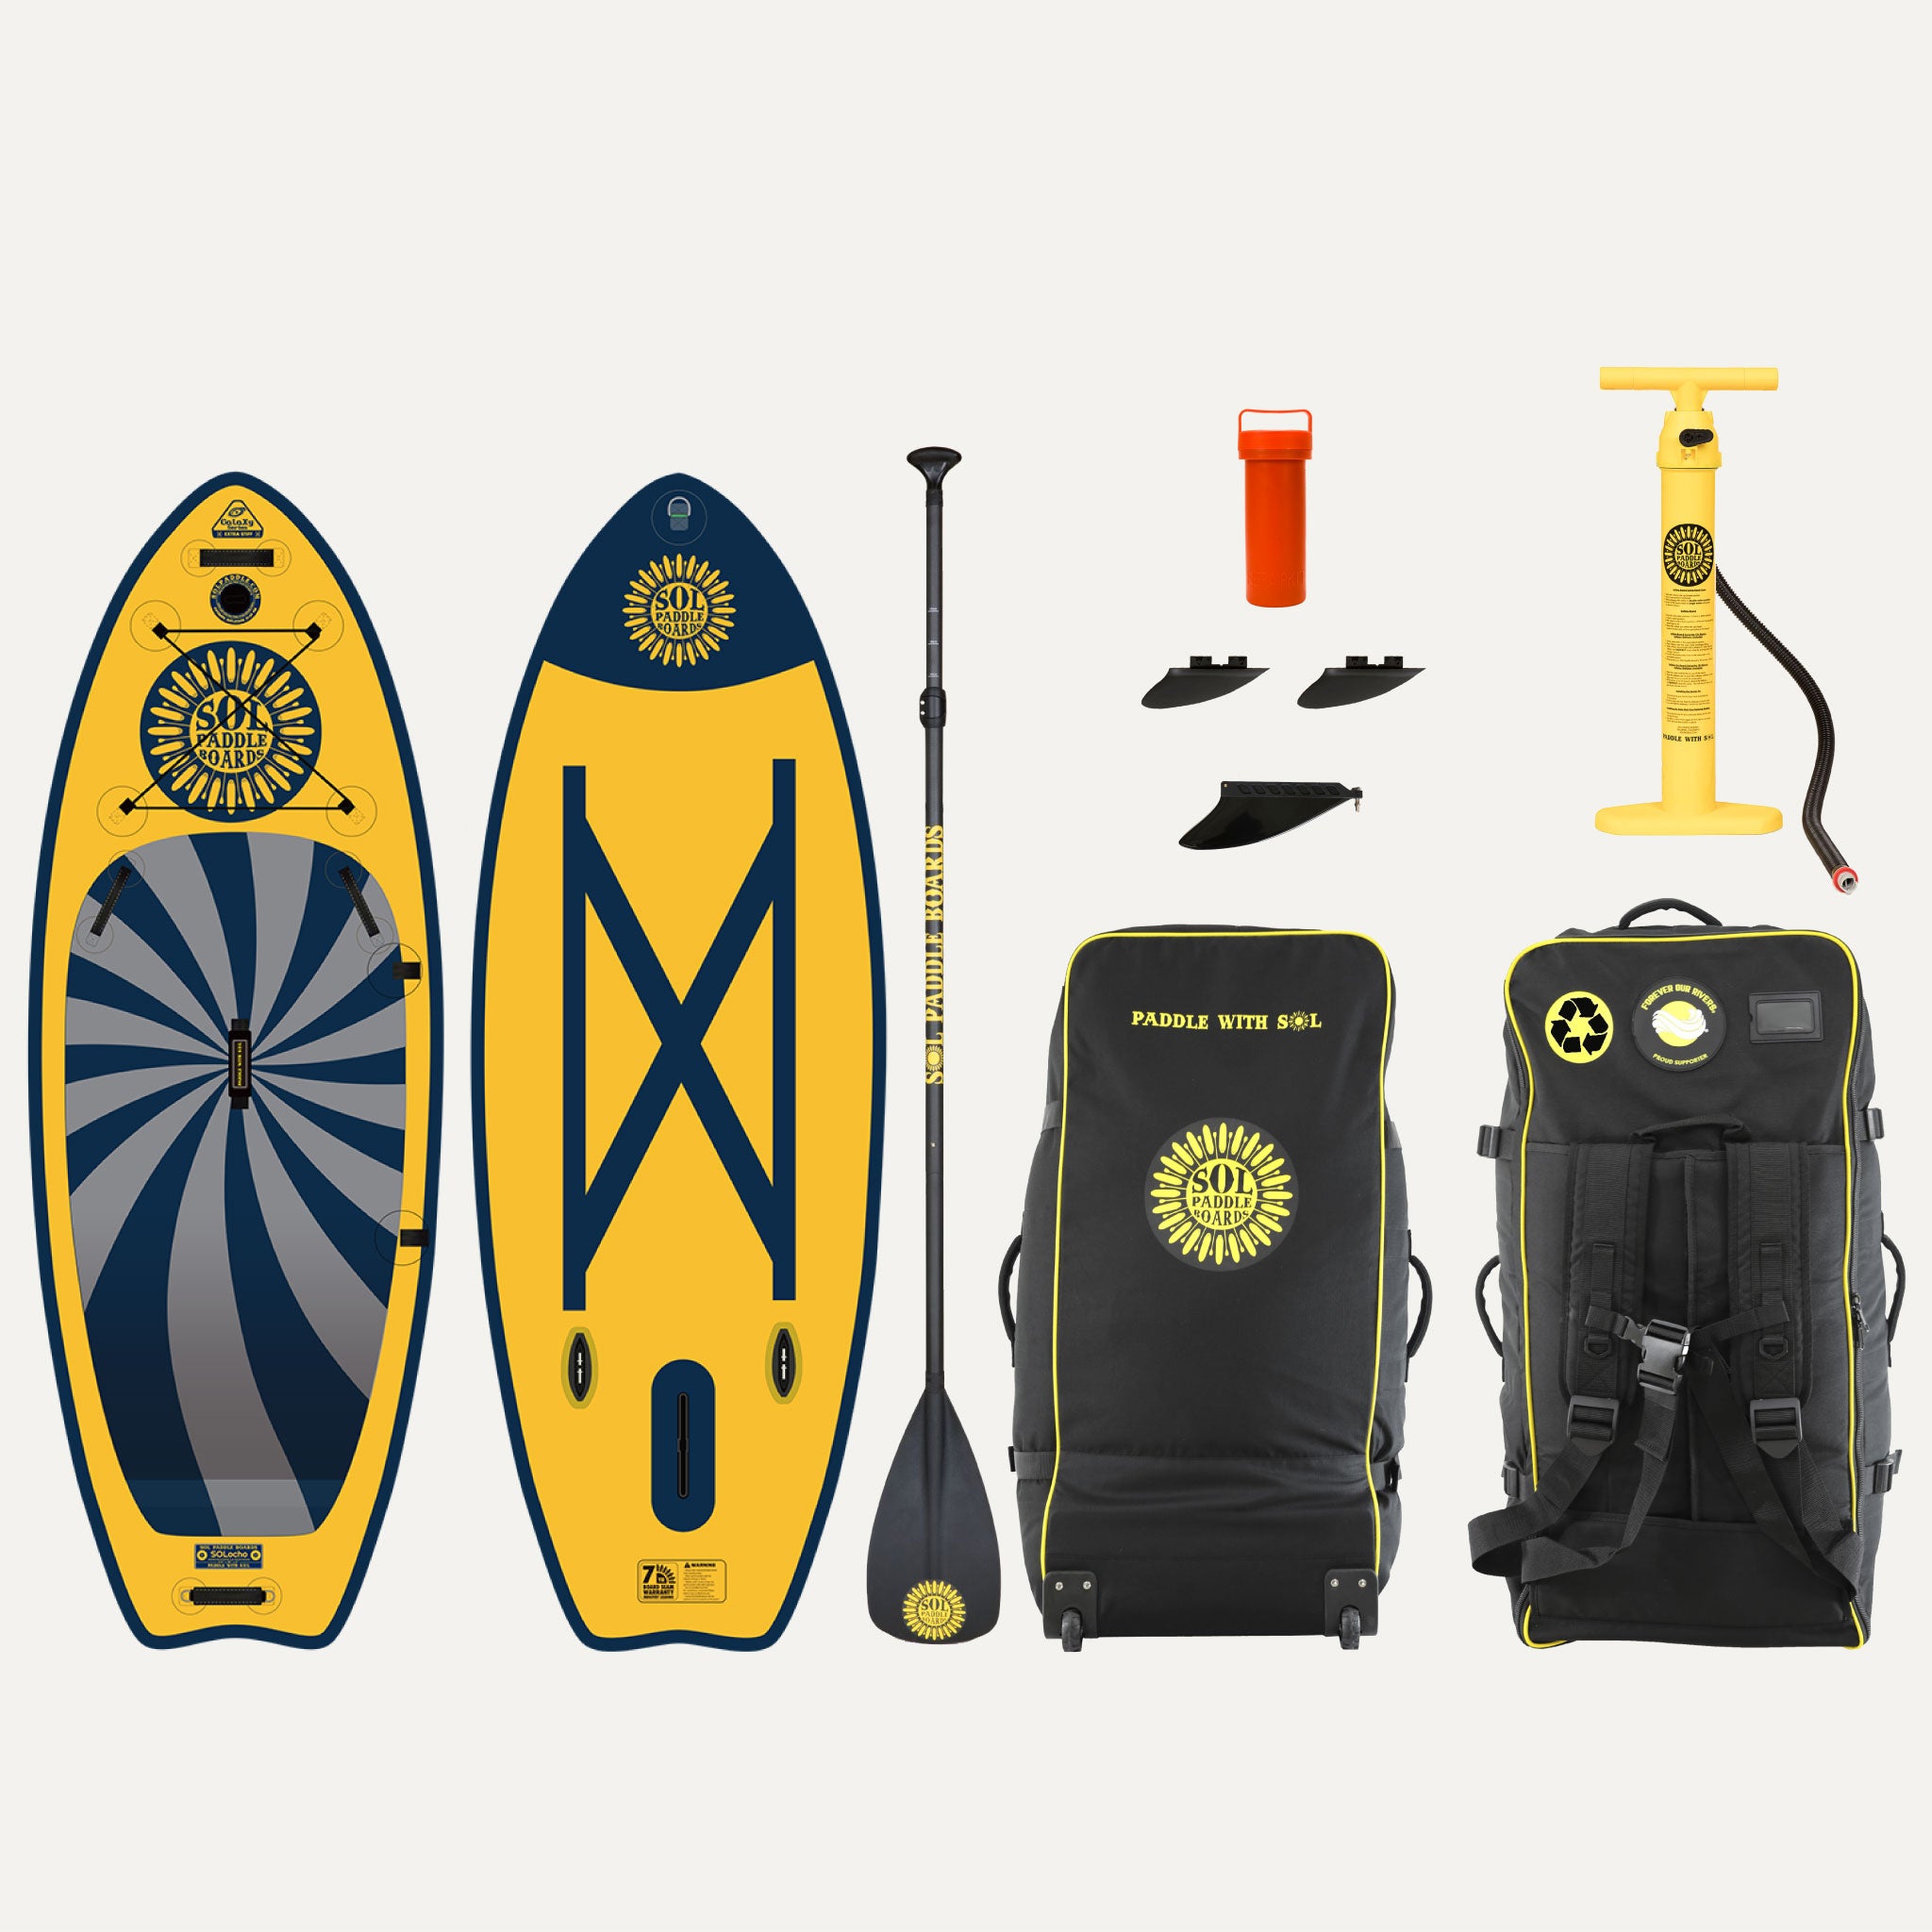 GalaXy SOLriverocho Inflatable Paddle Board showcasing the top and bottom views of the SUP board and the accessories that come with it